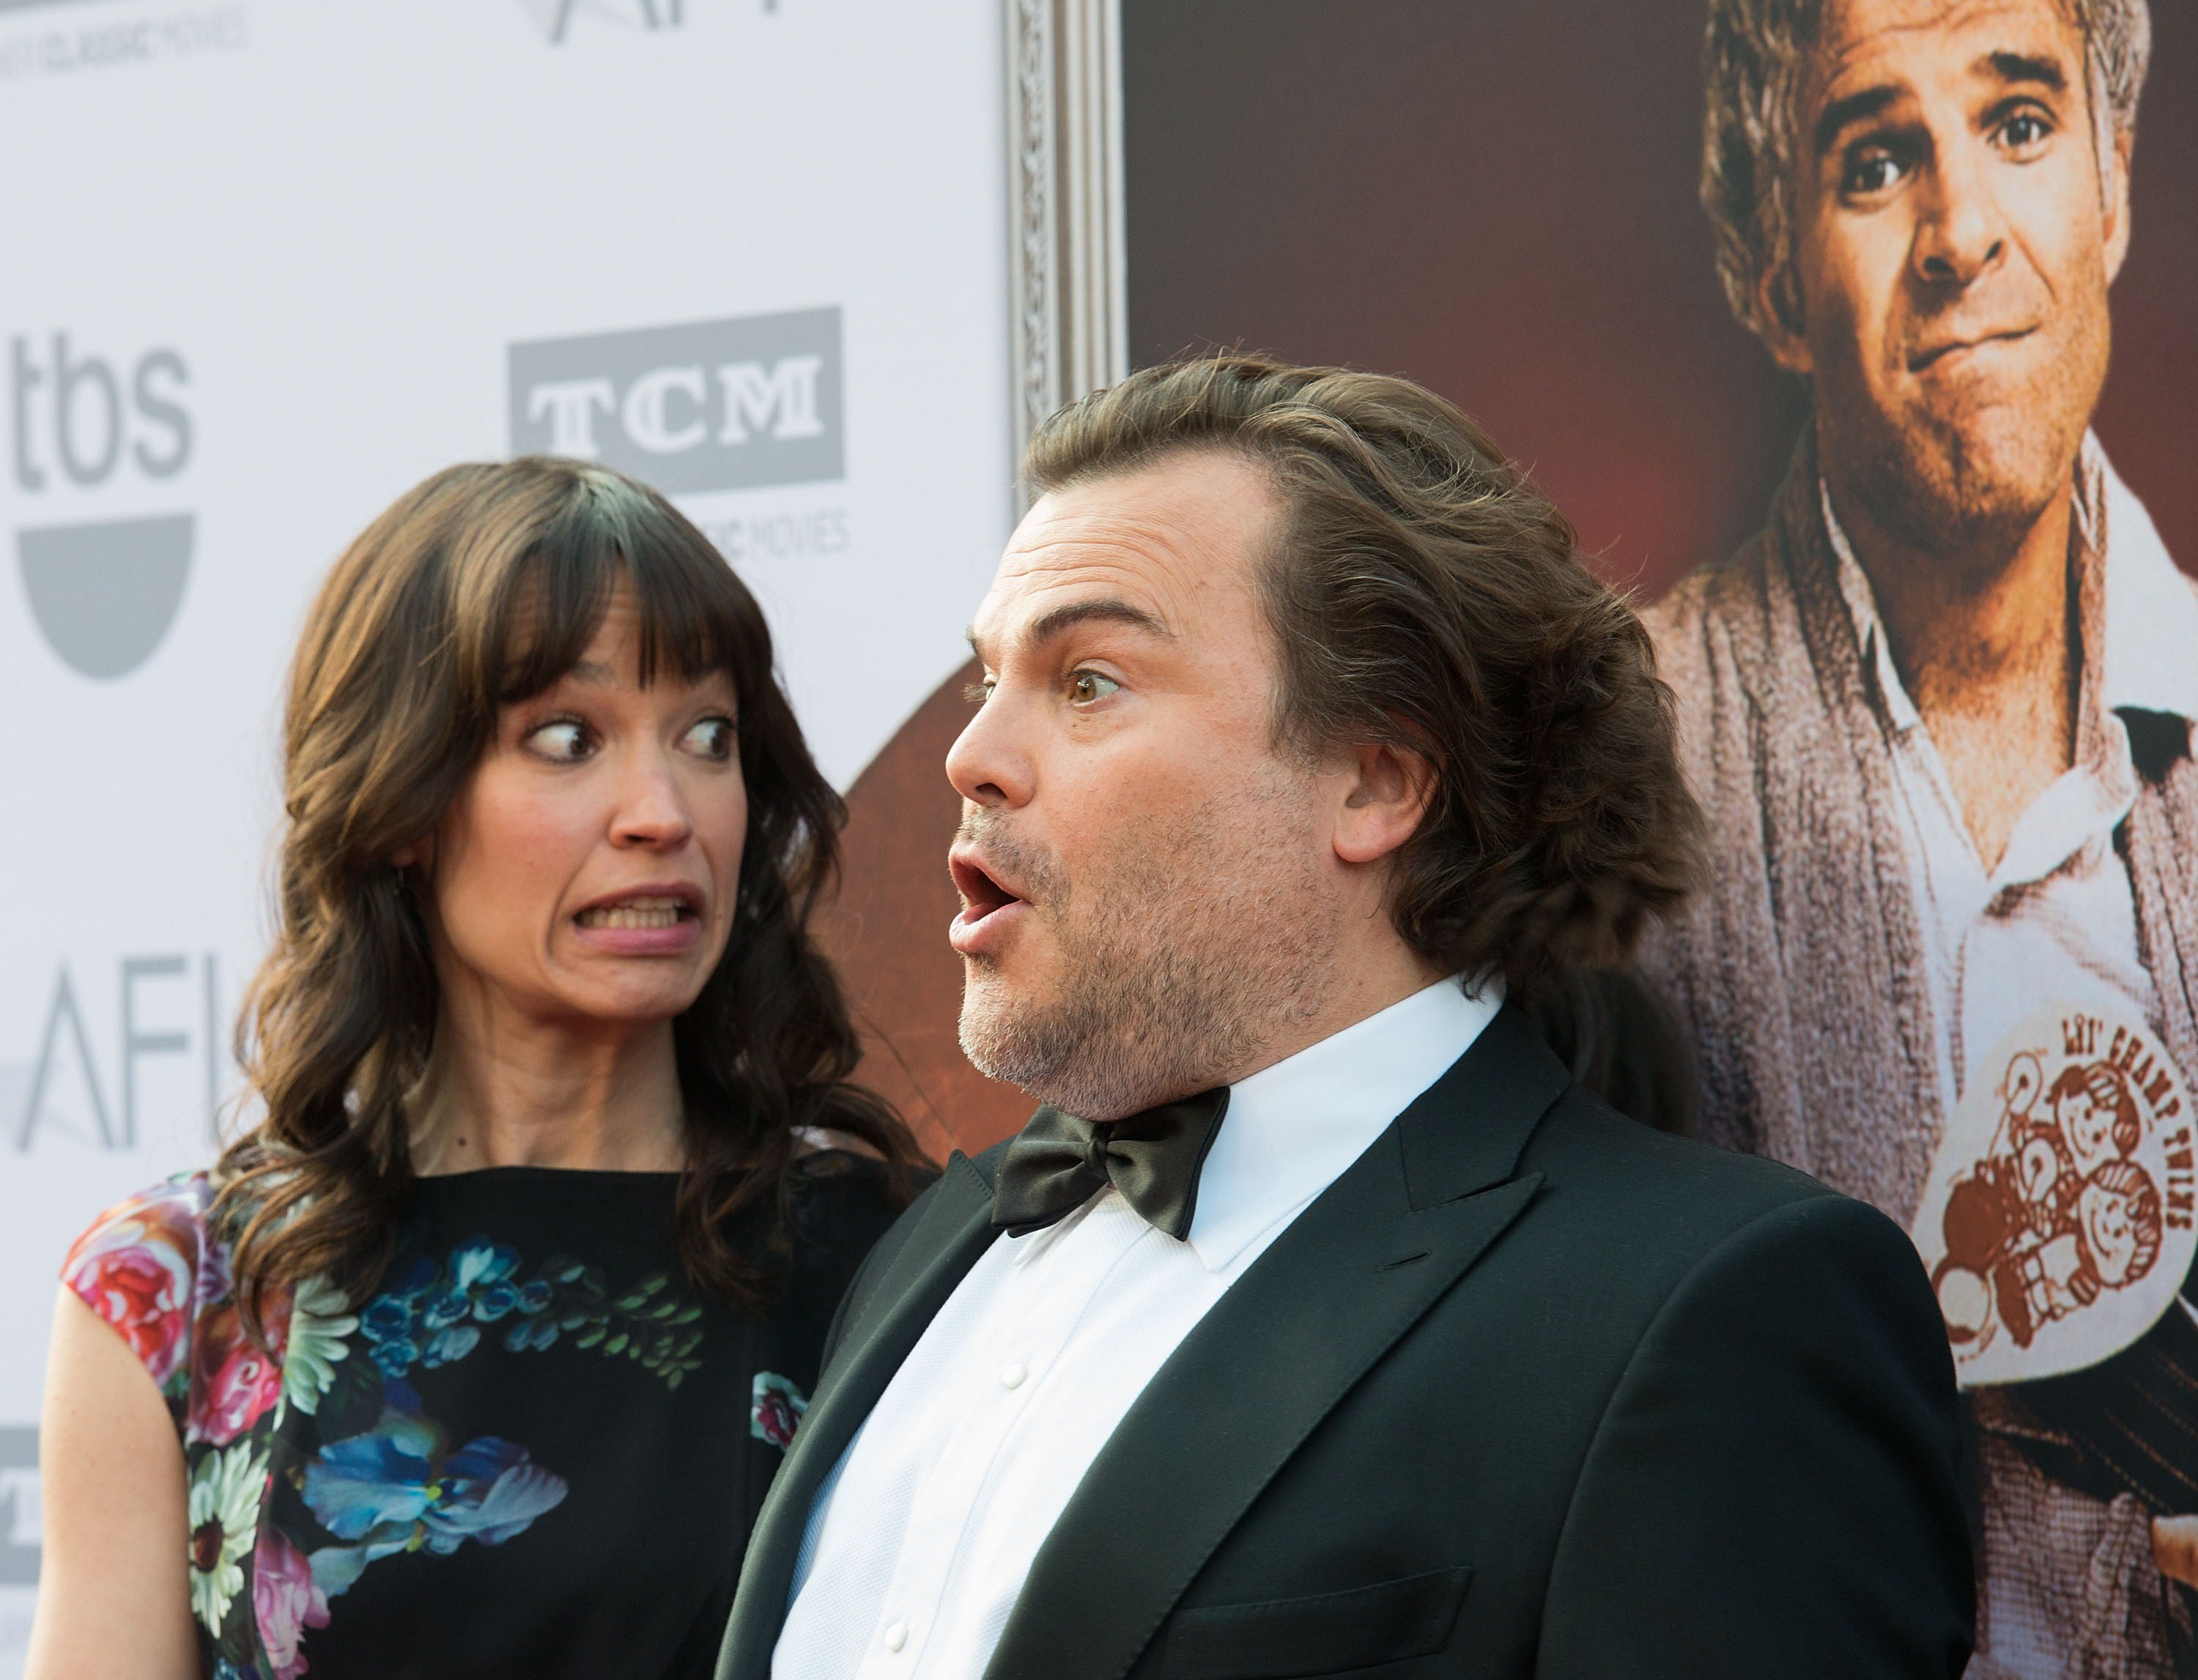 Artist Tanya Haden (L) and actor Jack Black arrive for the AFI Life Achievement Award Gala Honoring Steve Martin in Hollywood, California, June 4, 2015. | Source: Getty Images